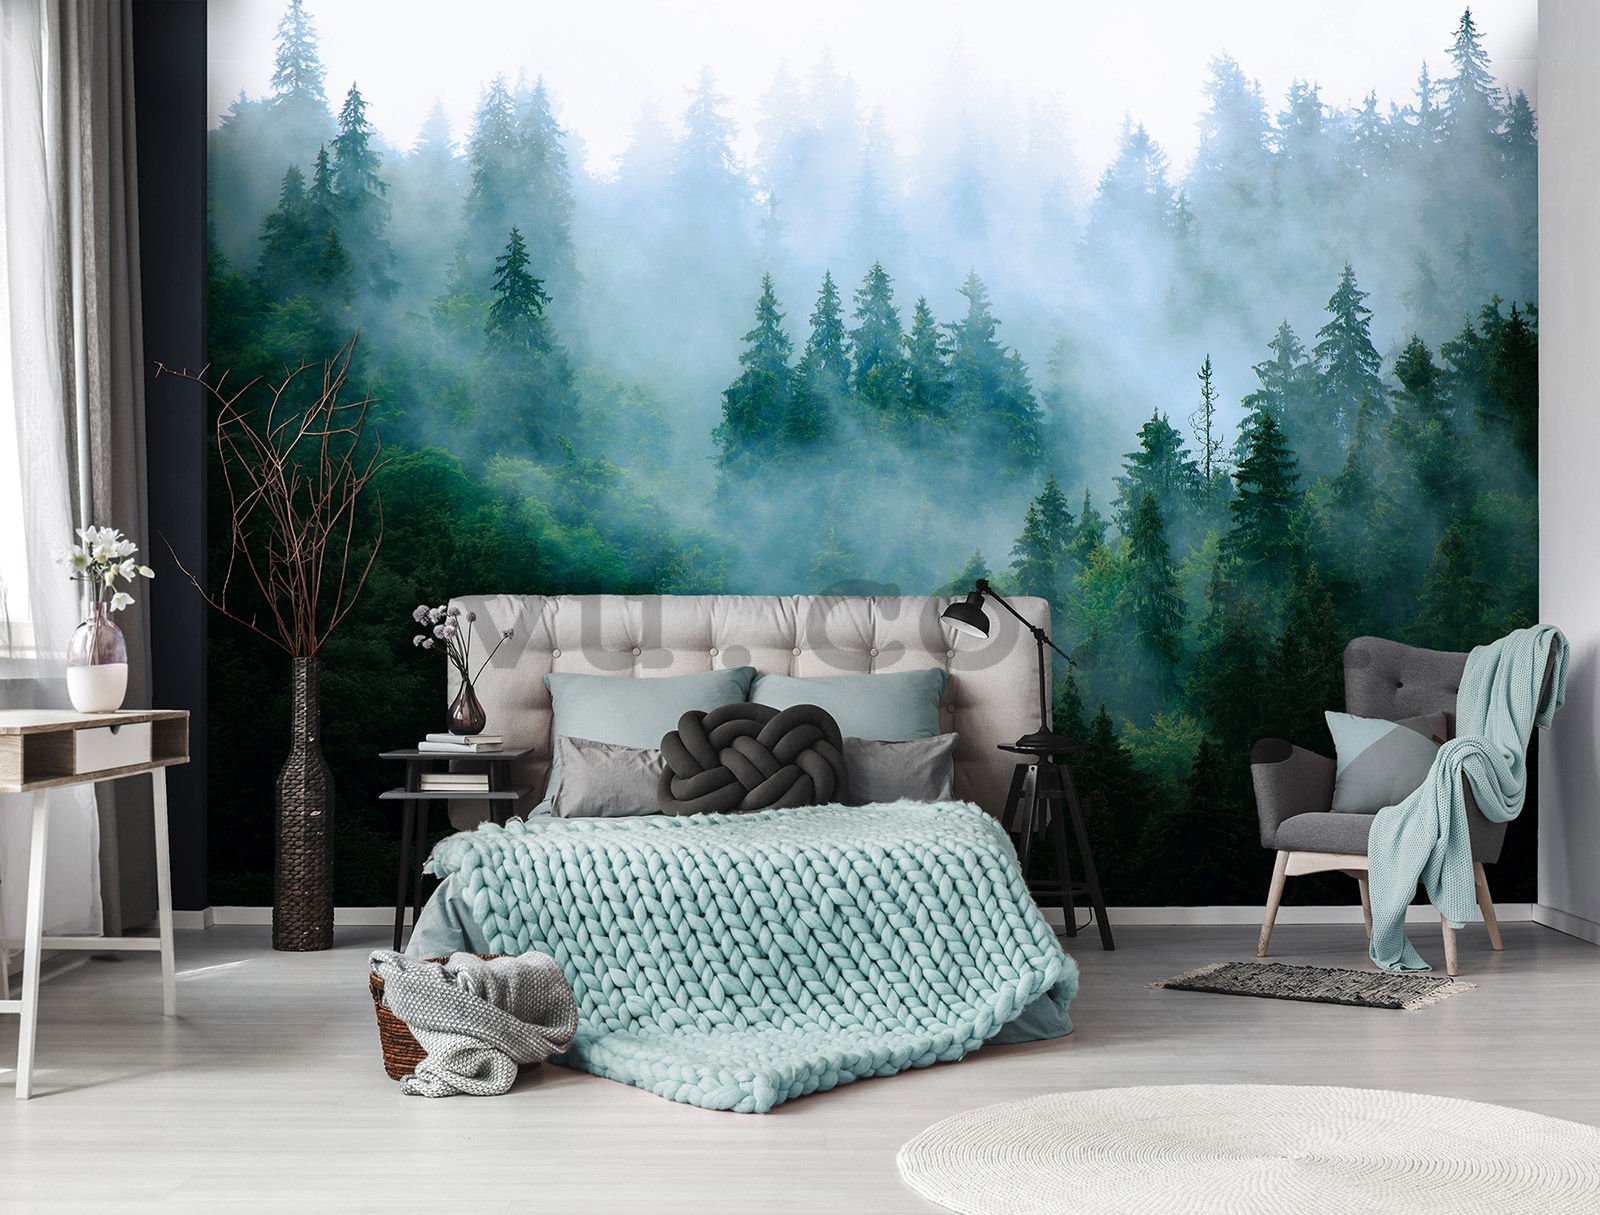 Wall mural vlies: Fog over the forest (3) - 152,5x104 cm